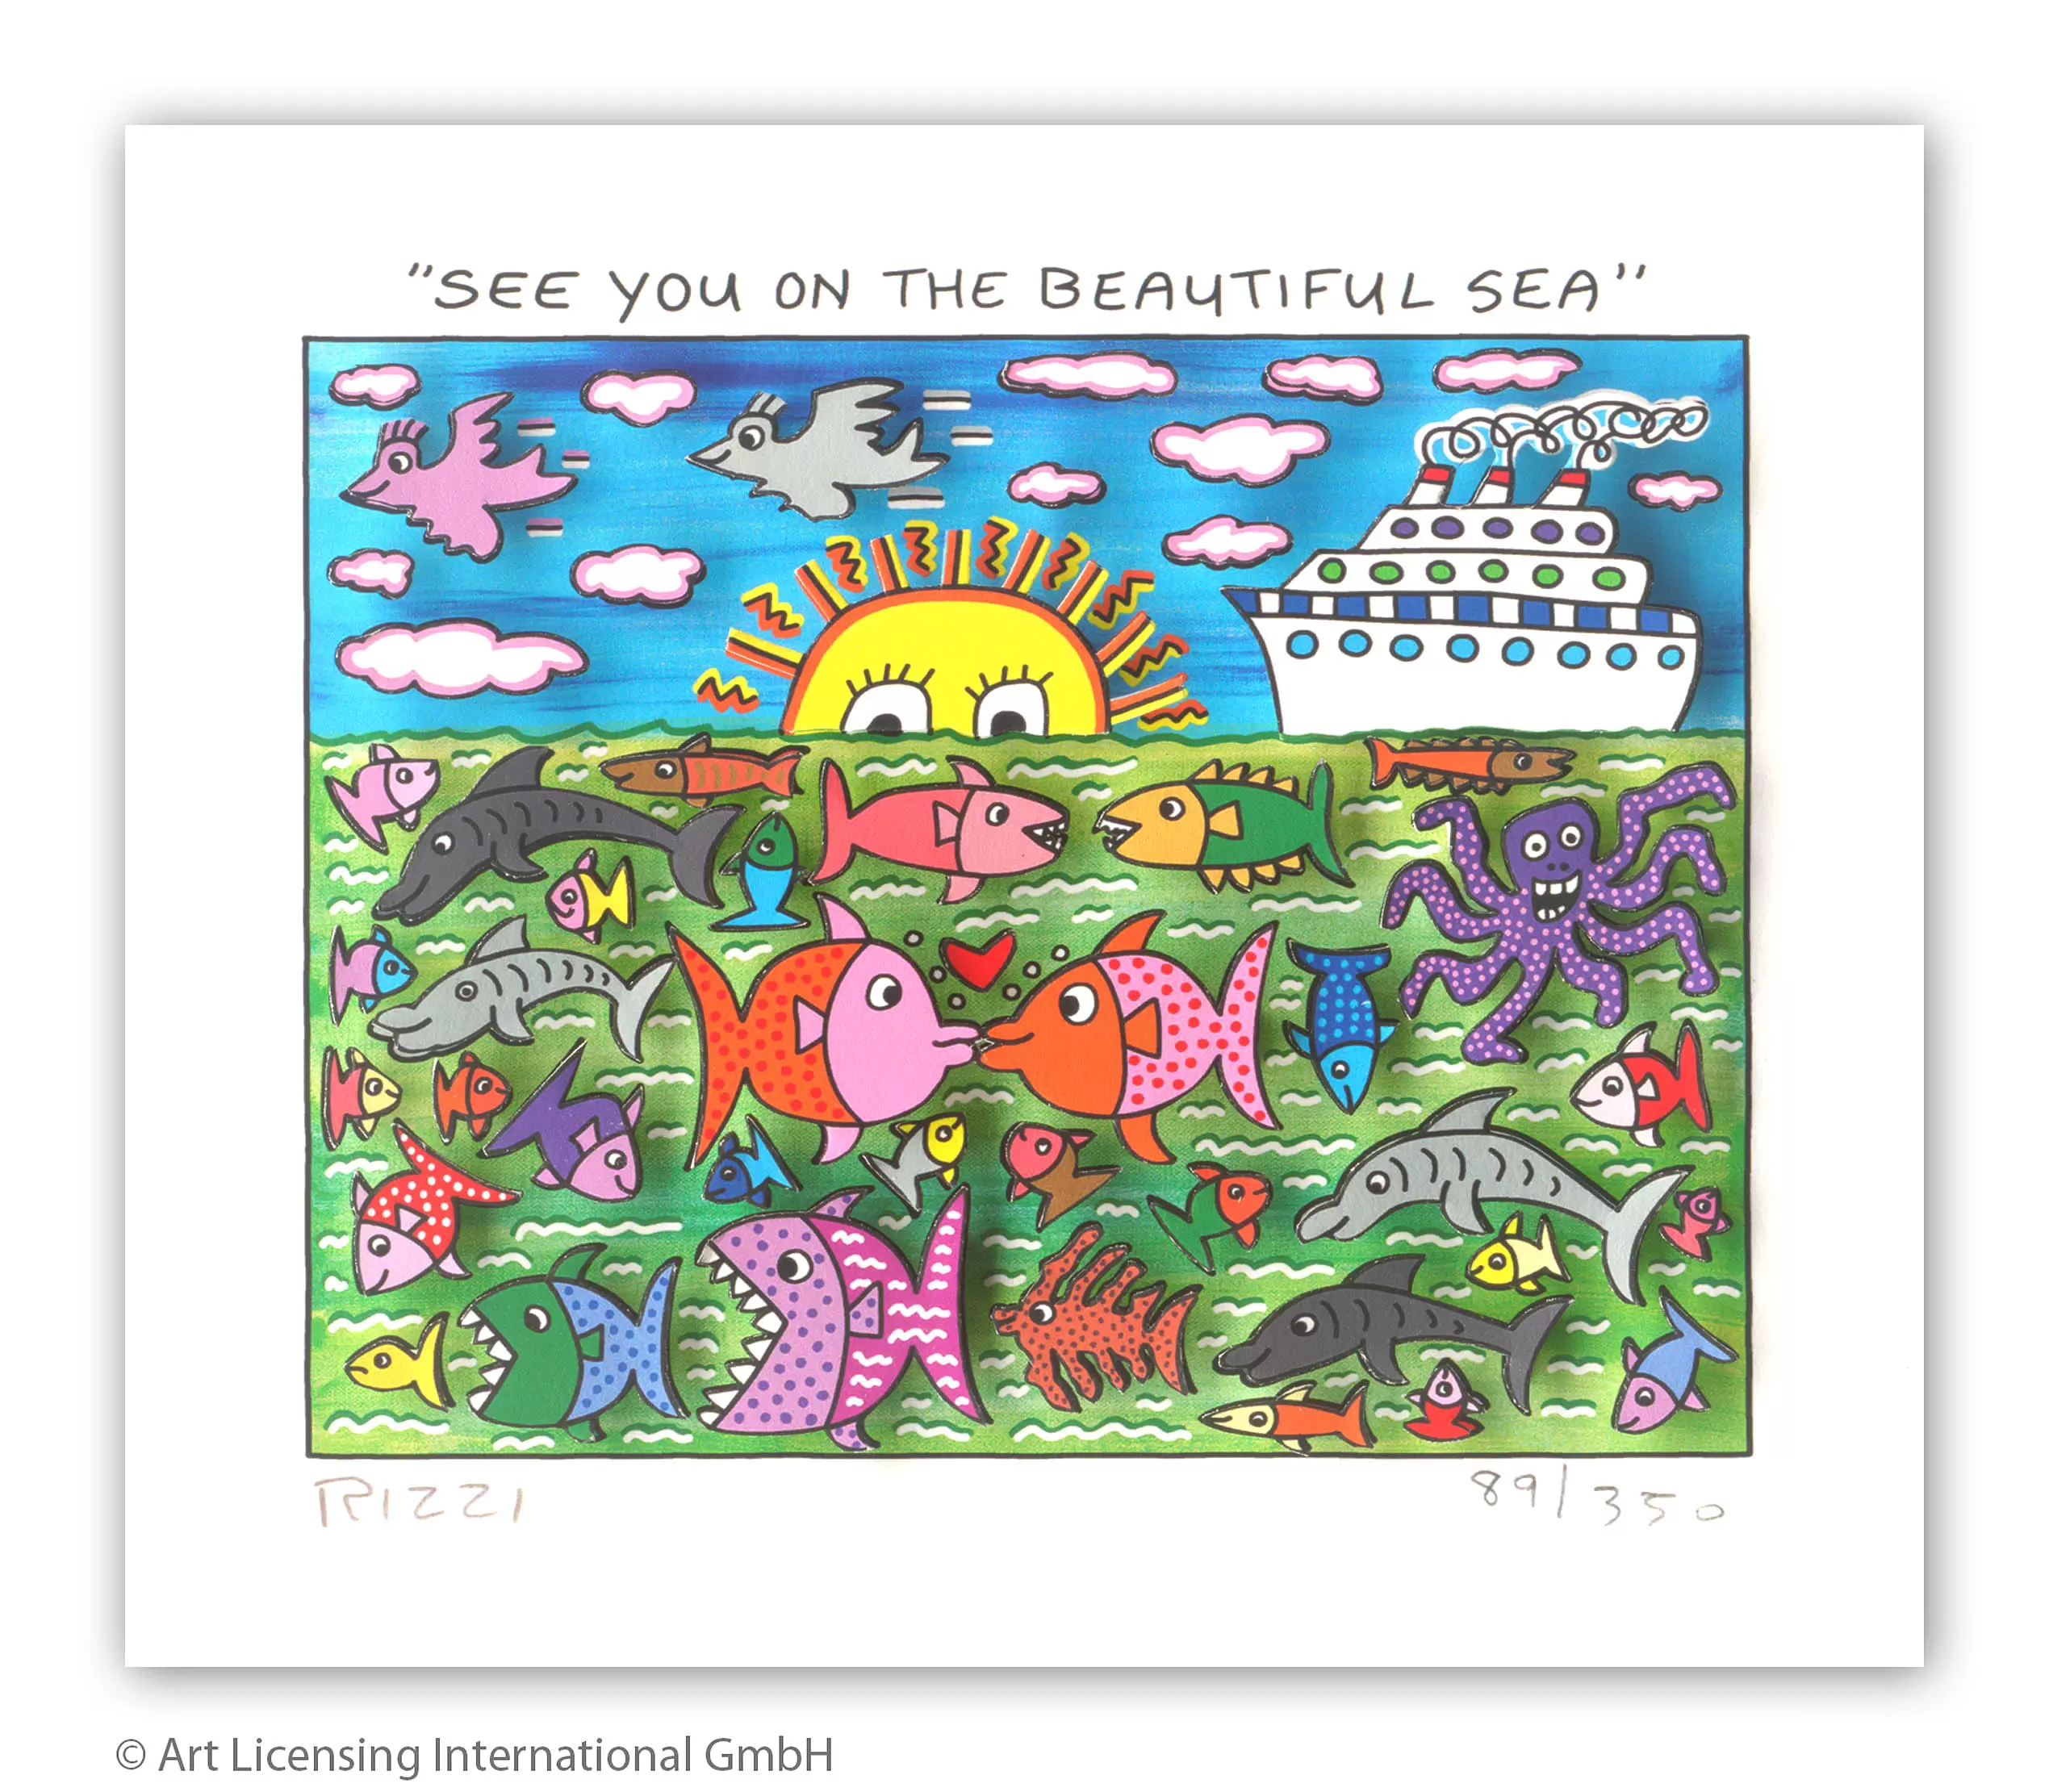 james-rizzi-see-you-on-the-beautiful-sea-ungerahmt-kunst-3d